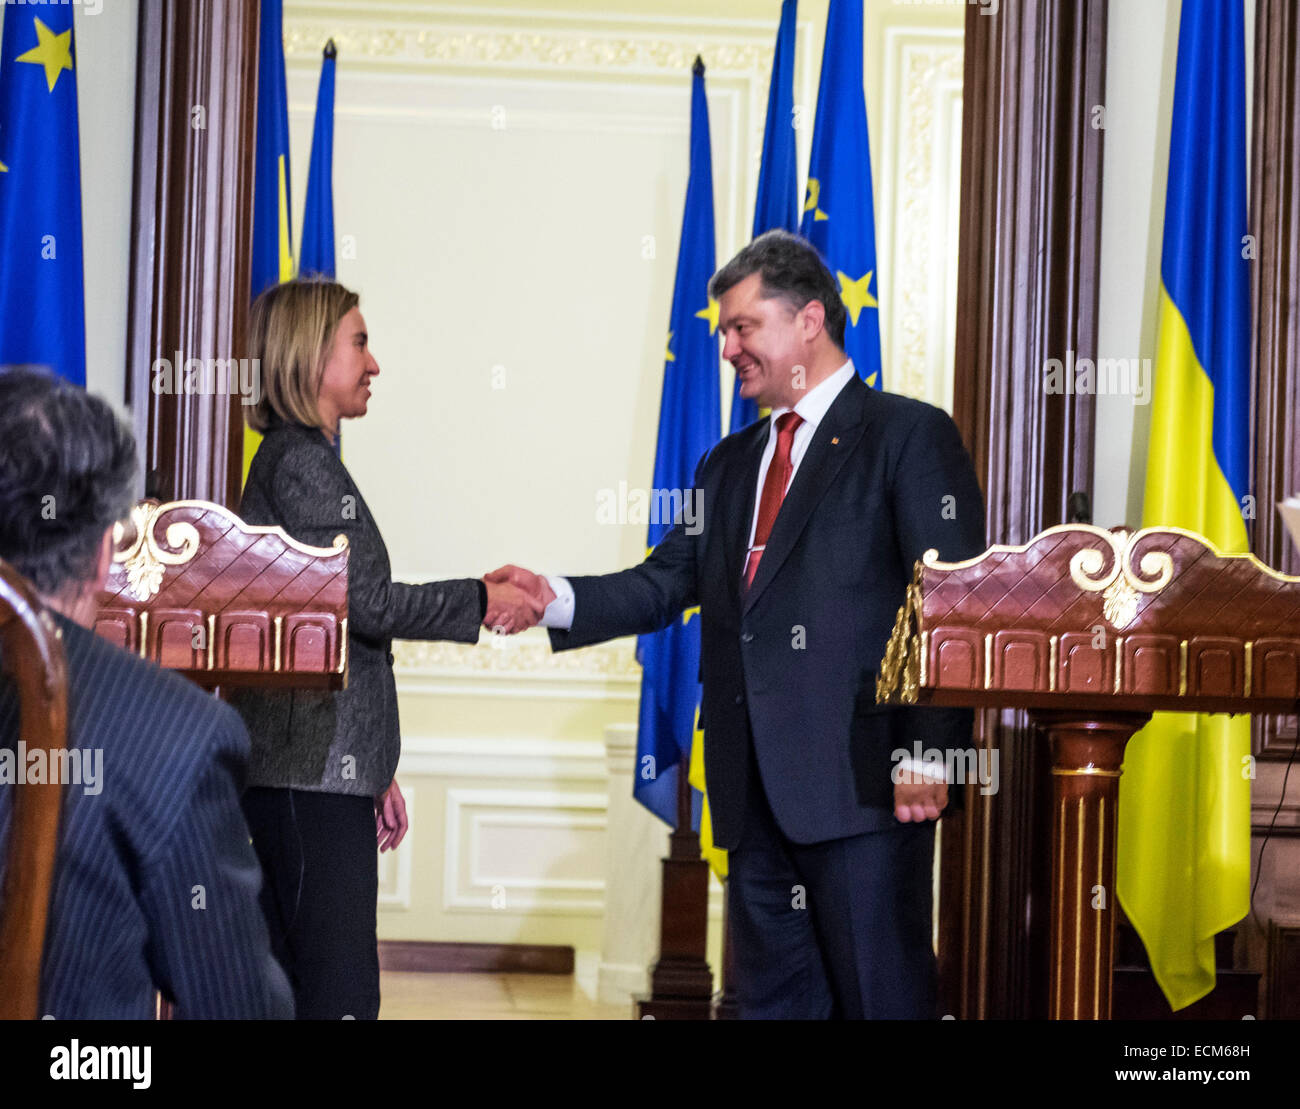 Kiev, Ukraine. 16th December, 2014. President of Ukraine Petro Poroshenko and EU High Representative for Foreign Affairs Federica Mogherini discussed in Kiev the situation in the Donbass and reforms necessary Ukraine. In addition, Ukraine and the EU agreed to complete the implementation of the Action Plan on visa liberalization to the Eastern Partnership summit in May 2015. Credit:  Igor Golovnov/Alamy Live News Stock Photo